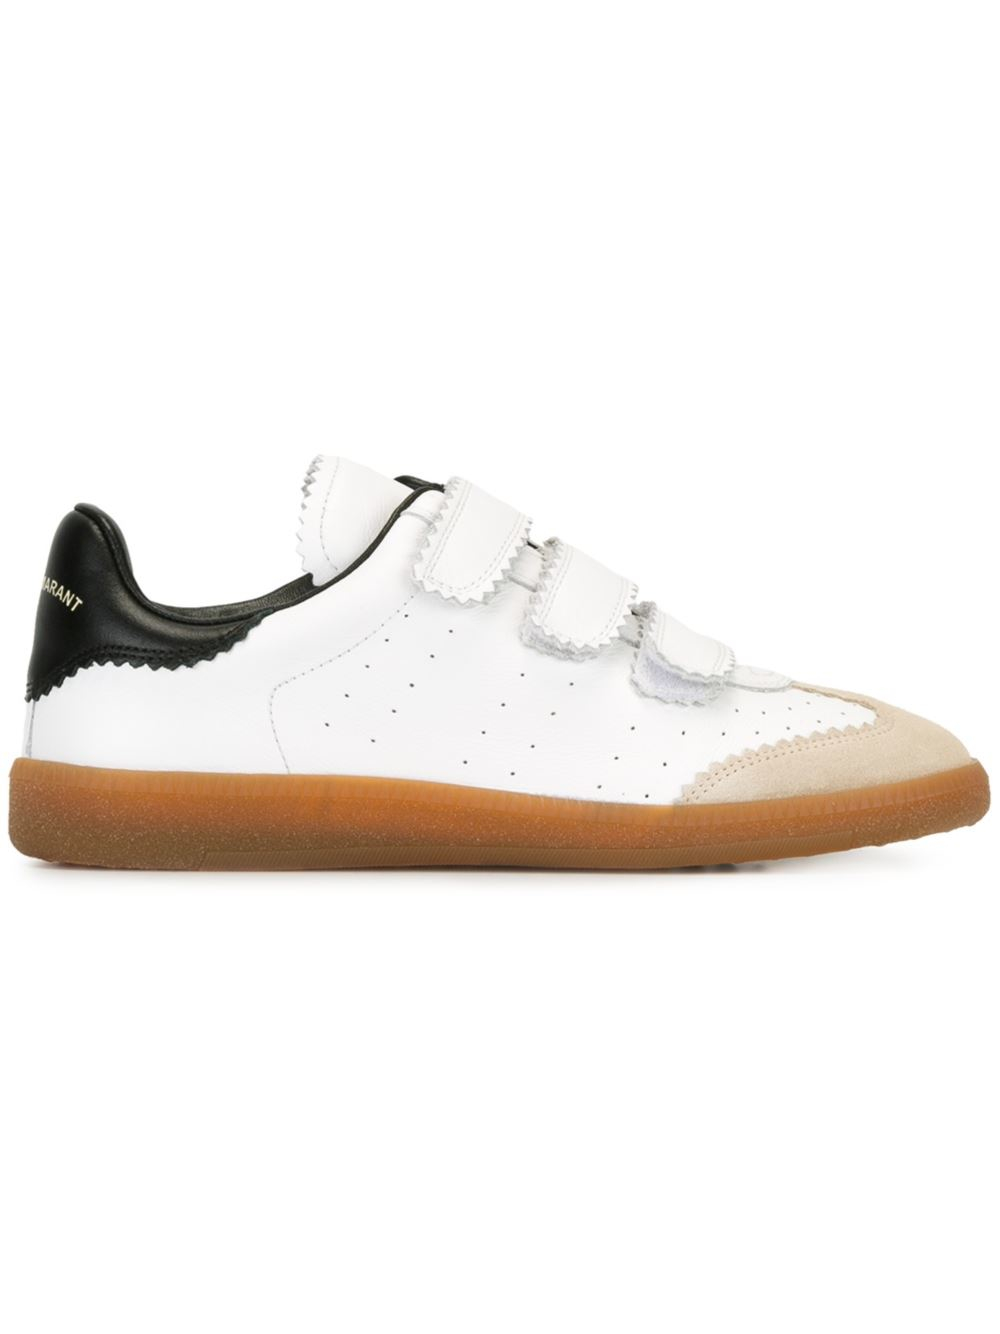 Isabel Marant Leather Étoile 'beth' Sneakers in White | Lyst